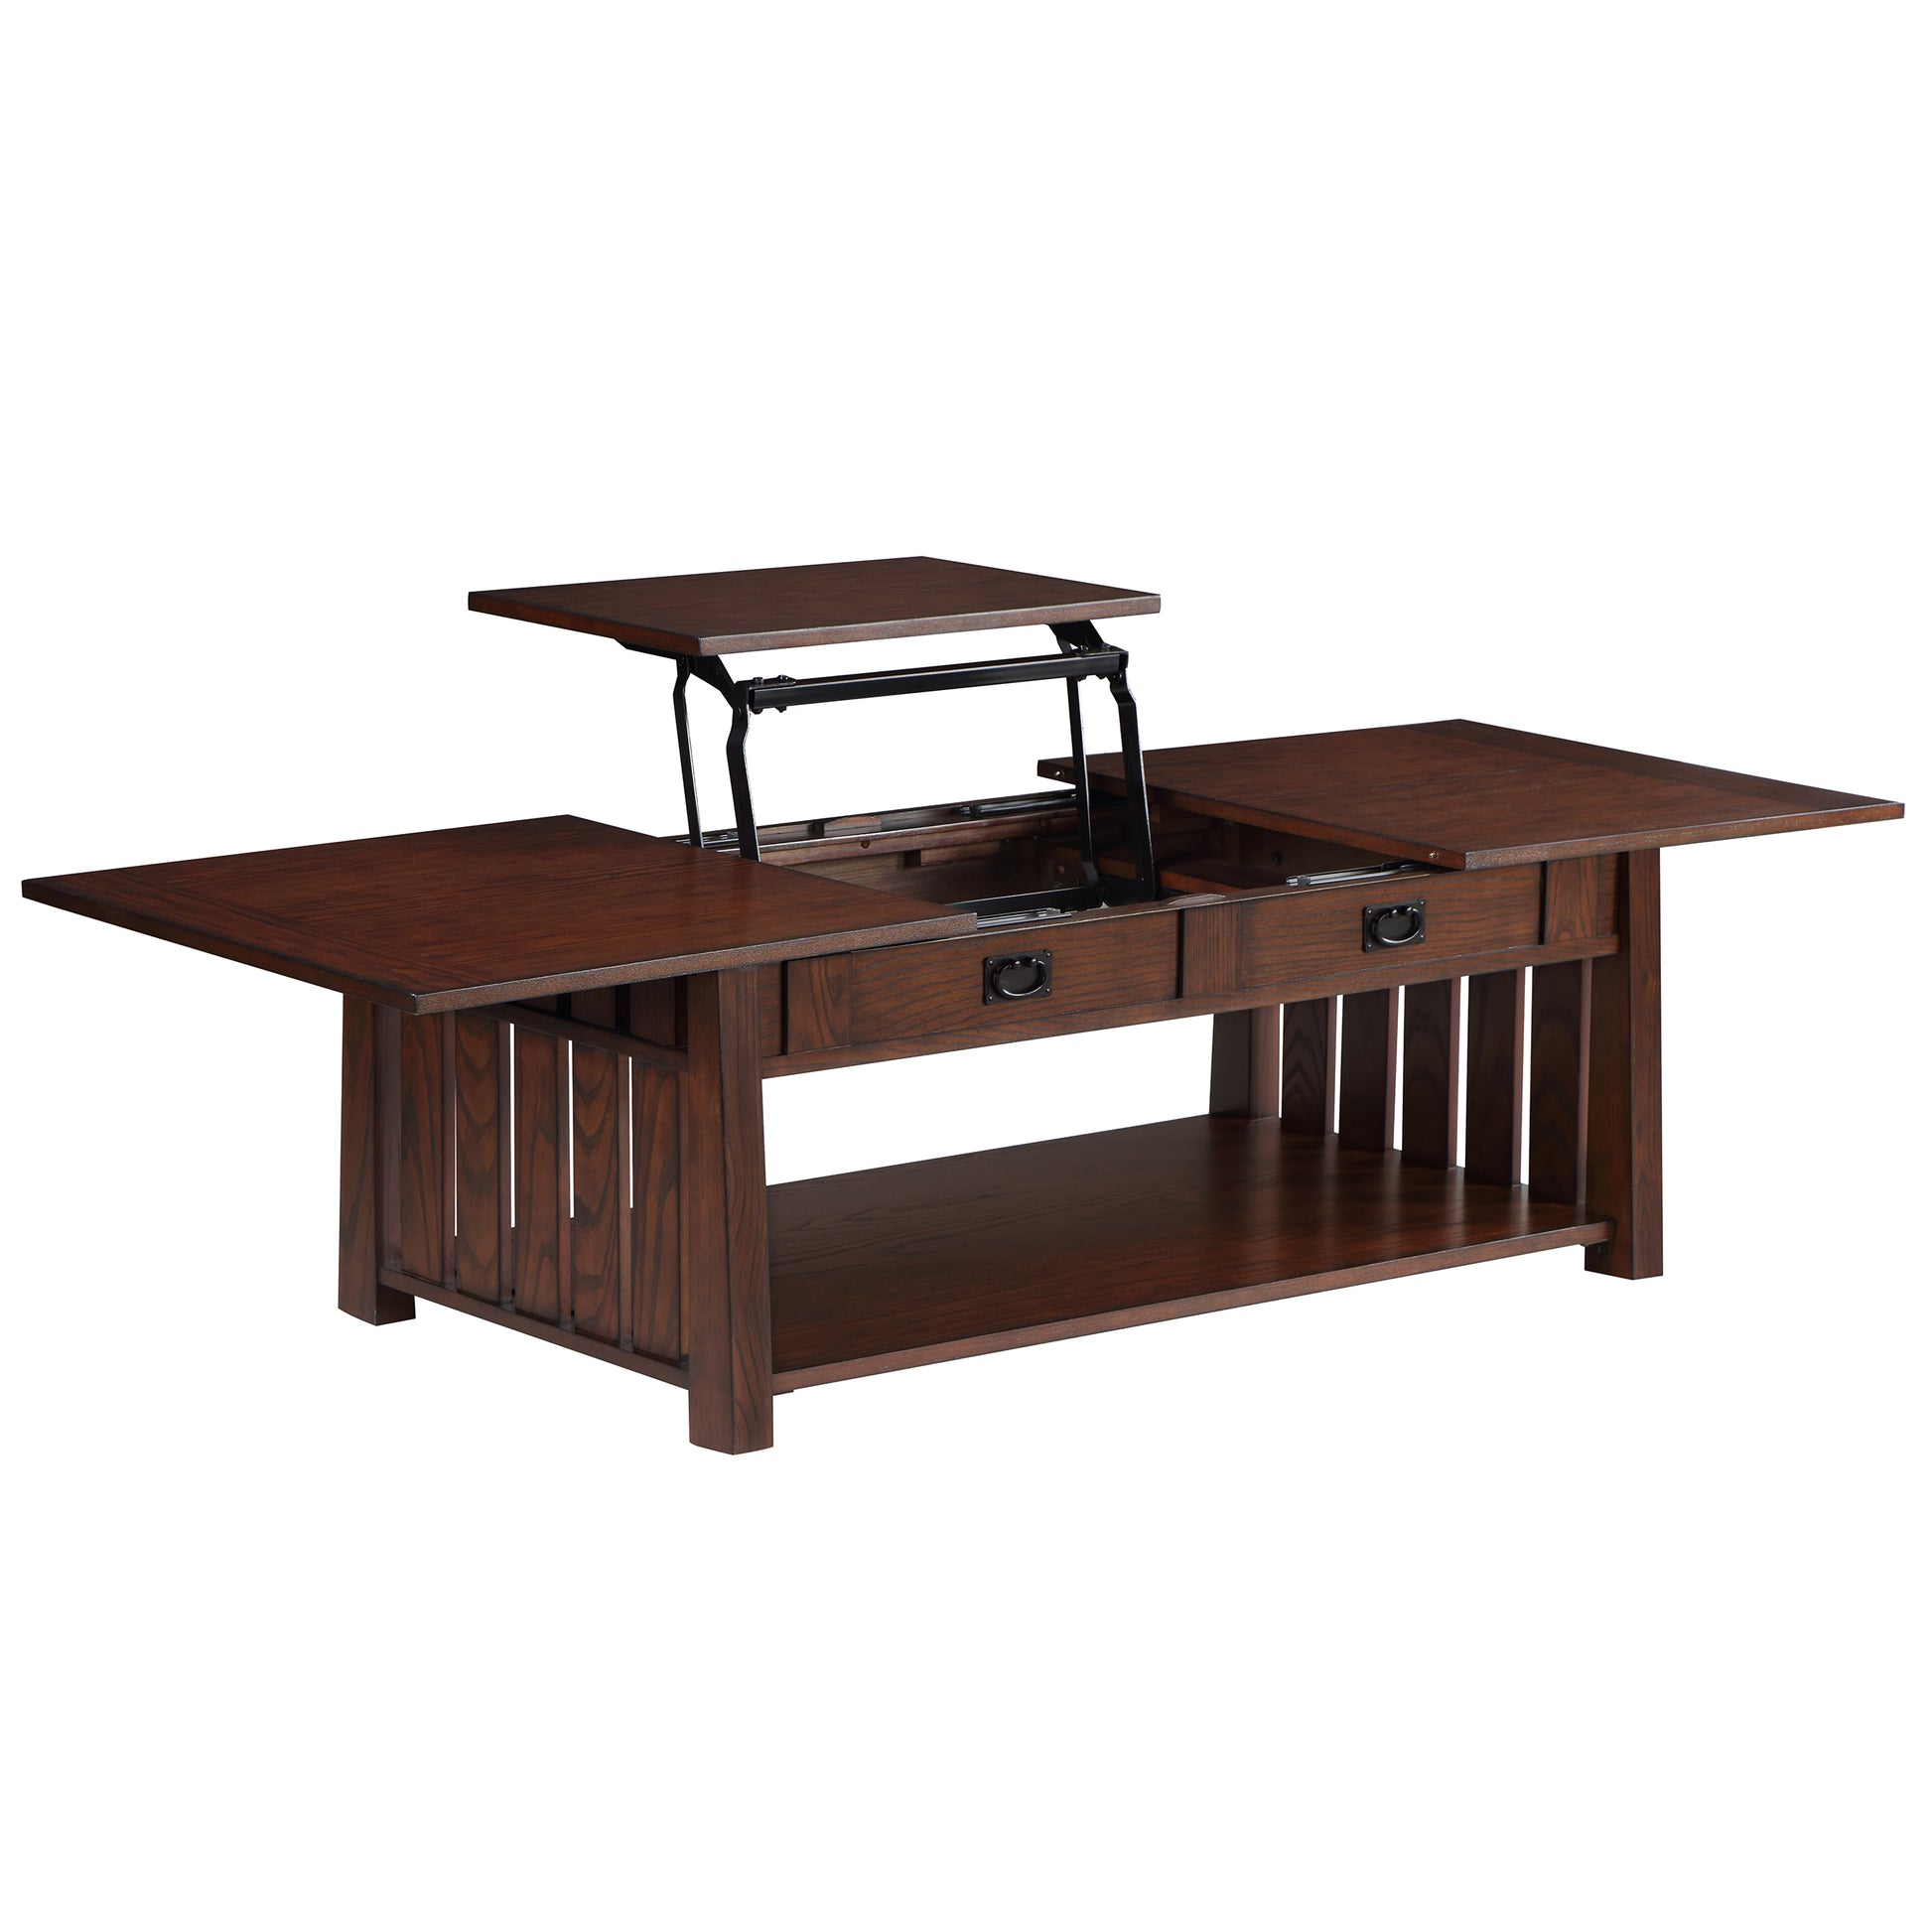 Right angled farmhouse mission style dark oak two-drawer coffee table with a sliding/lift top open on a white background